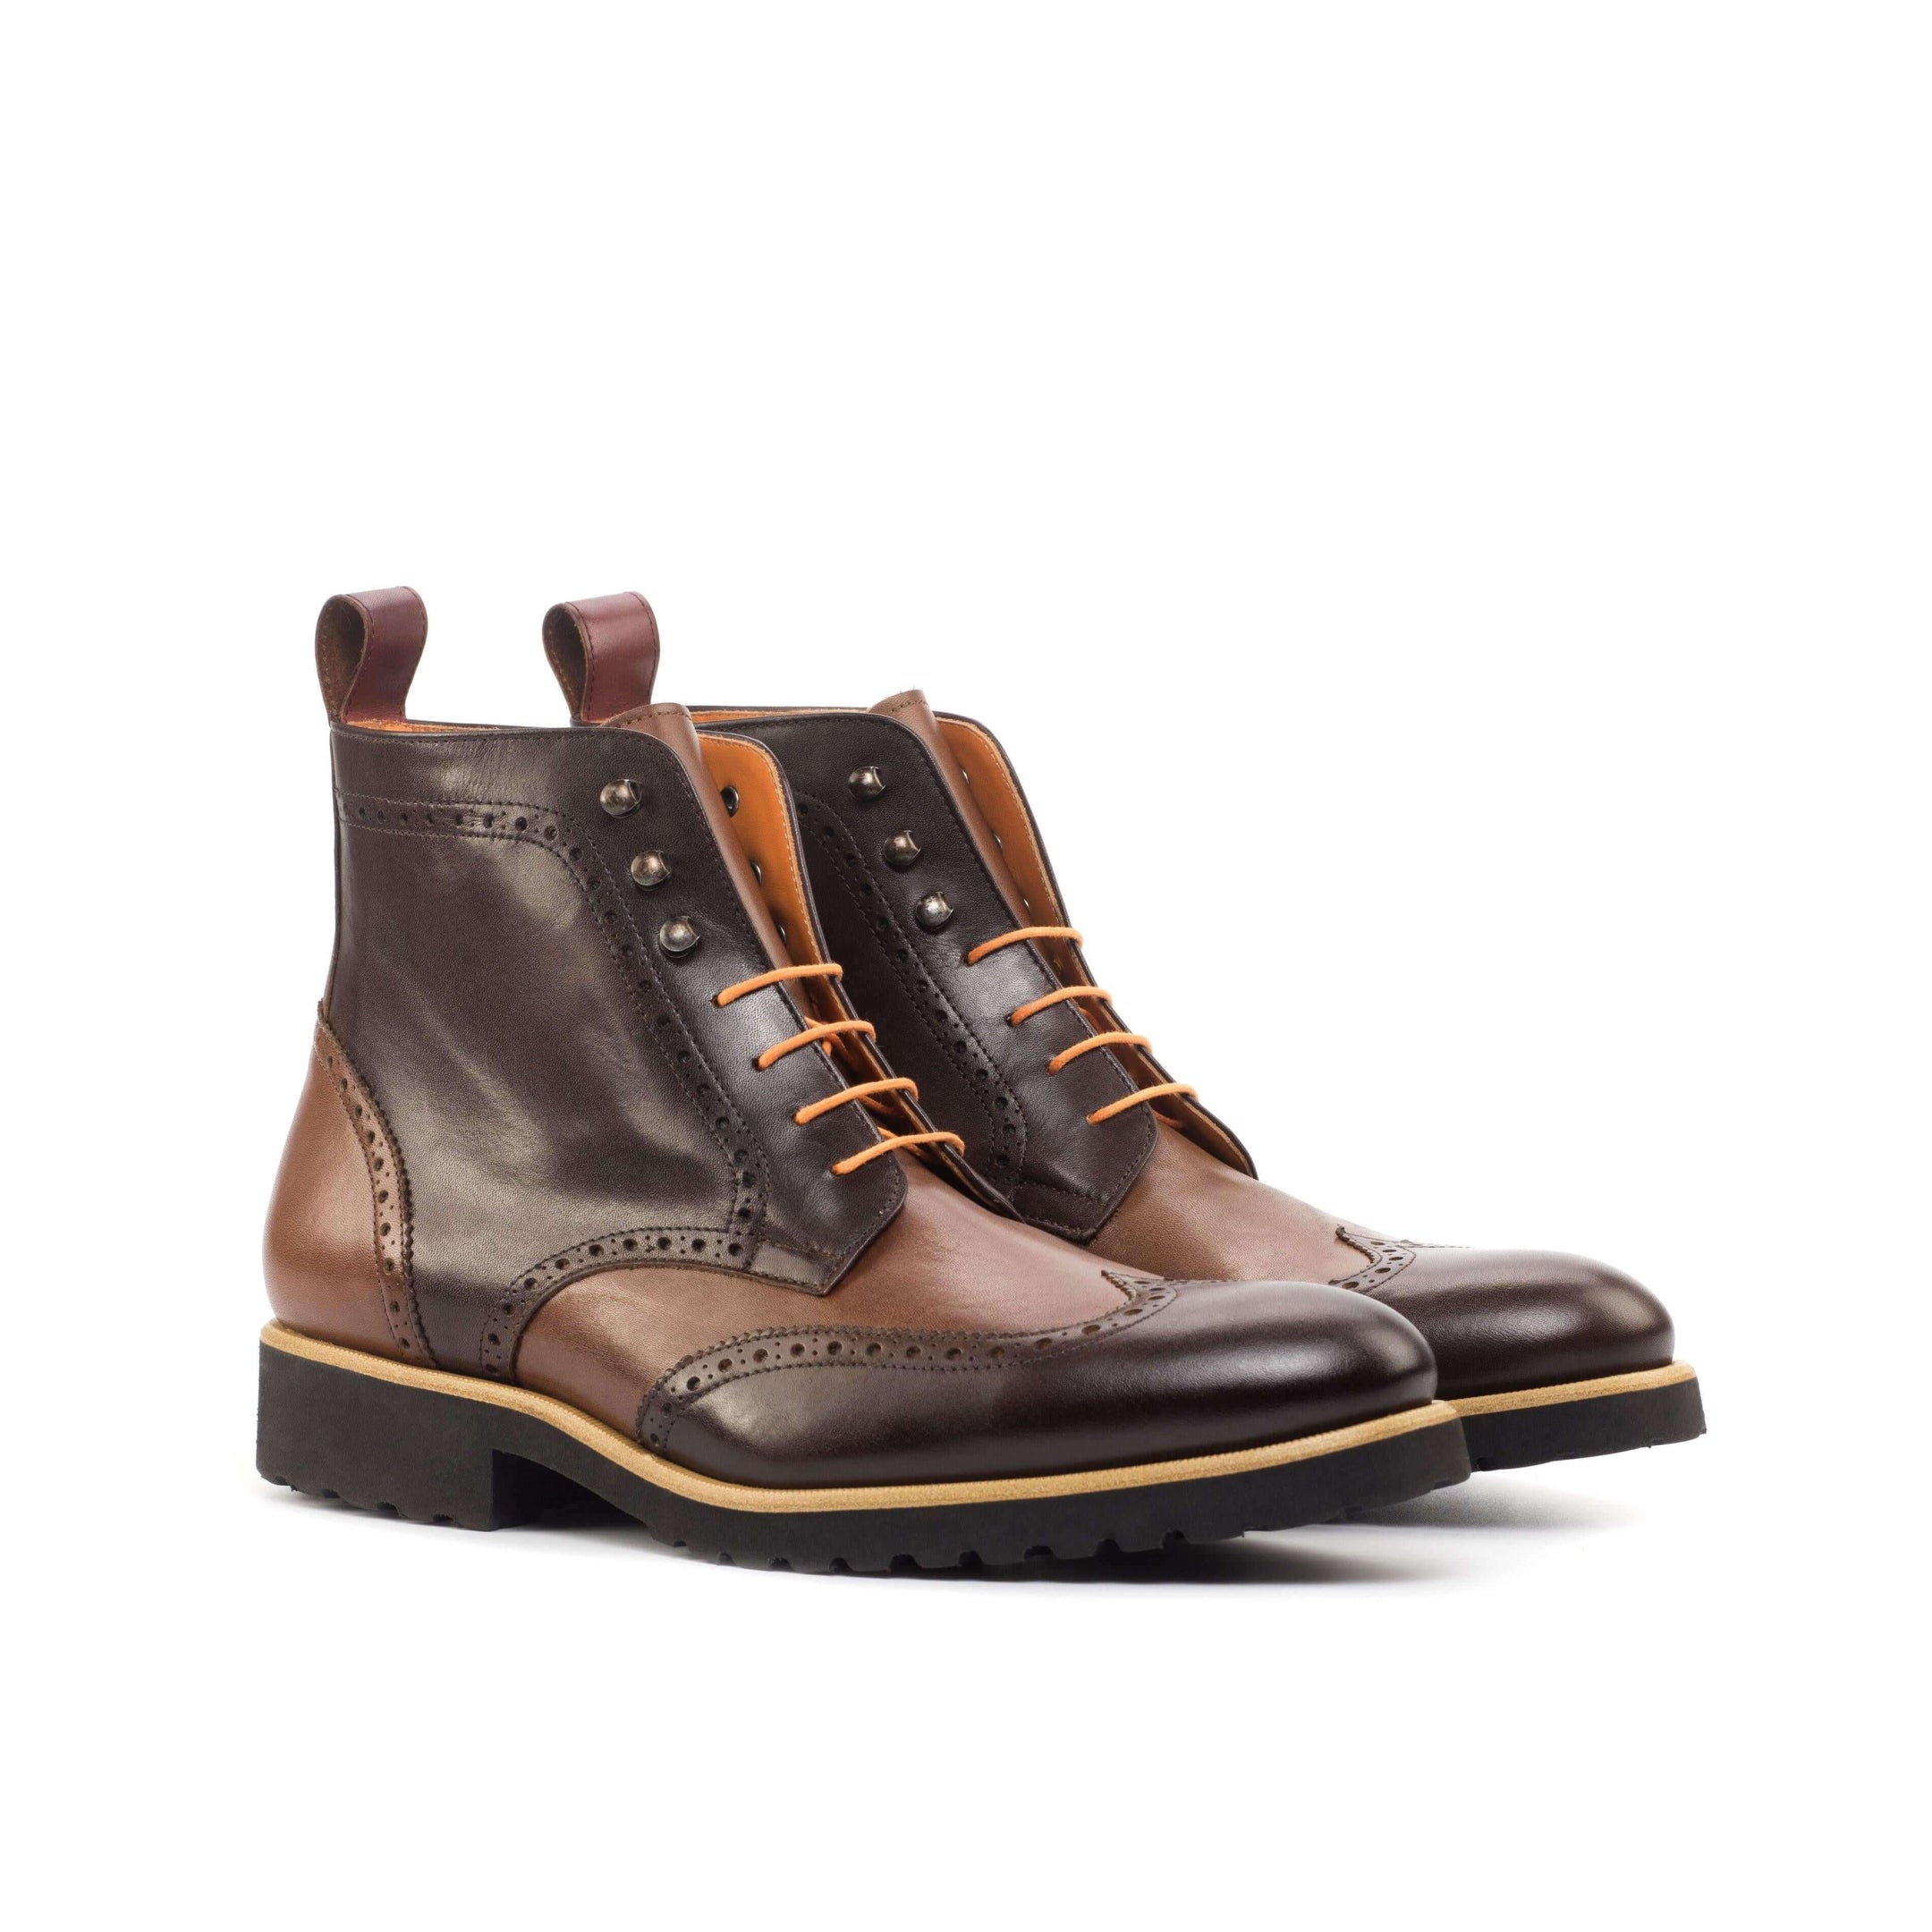 CL89 Military Brogue Boots